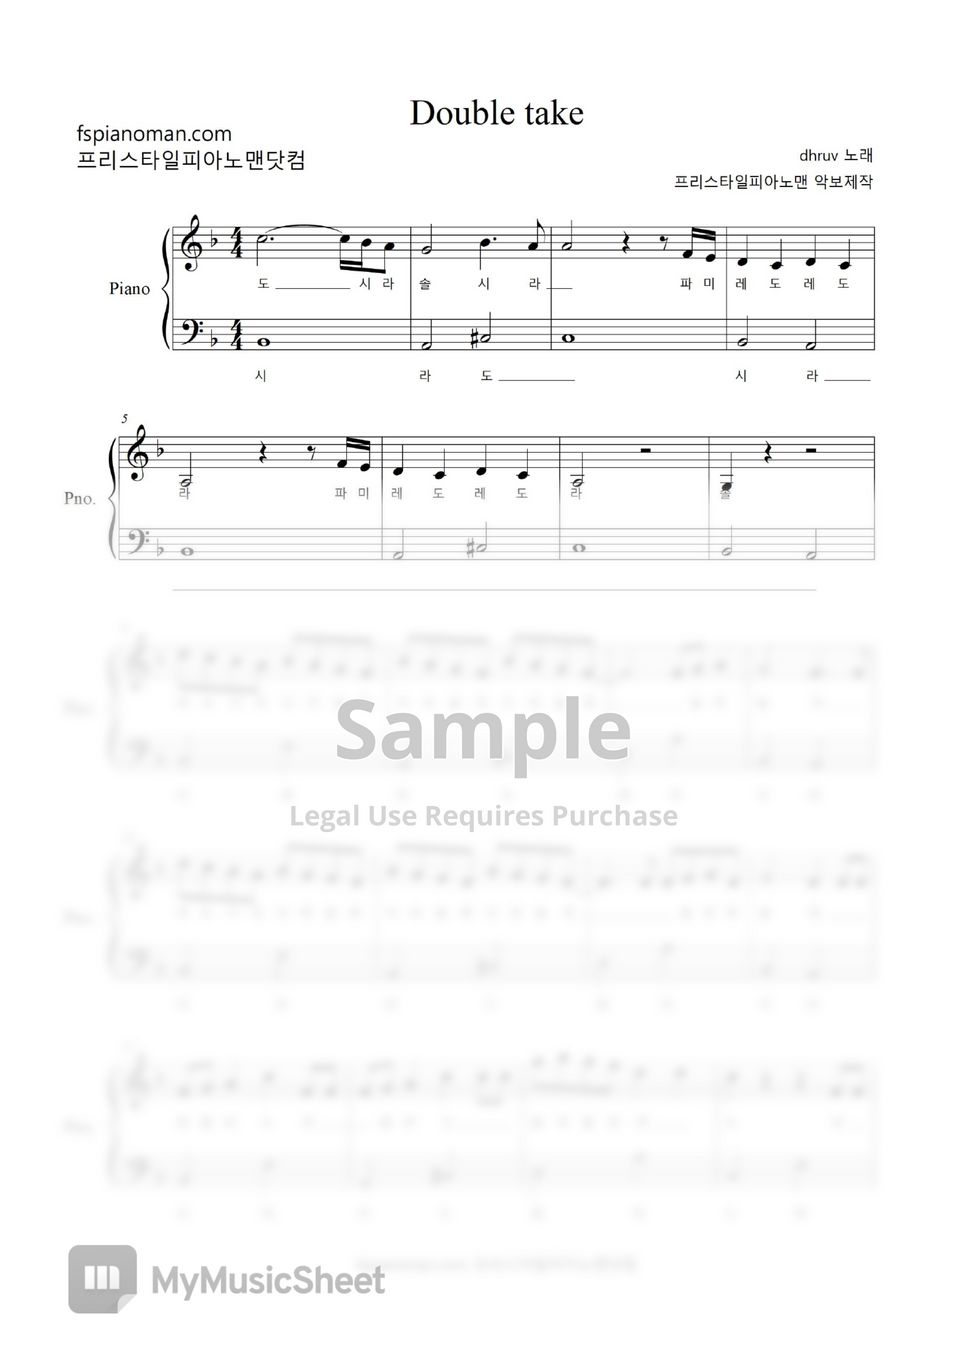 dhruv - double take Sheets by freestyle pianoman